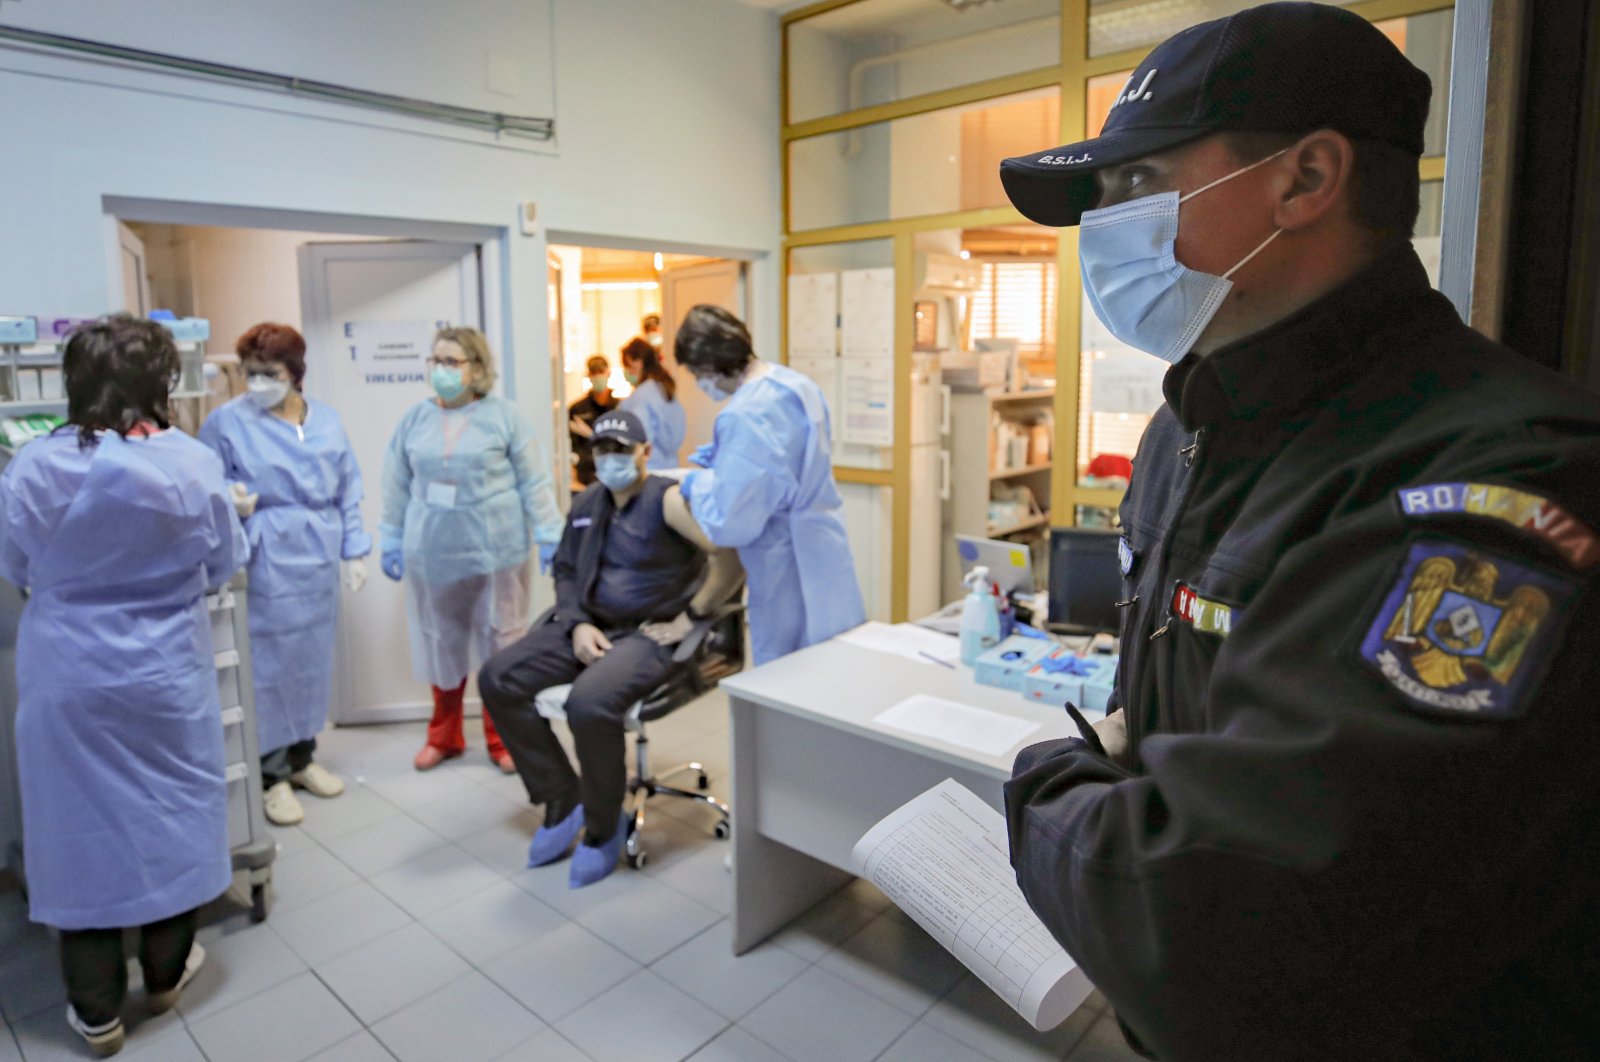 A Romanian gendarme waits to get a COVID-19 vaccine at a hospital in Bucharest, Romania, Jan. 15, 2021. (AP Photo)